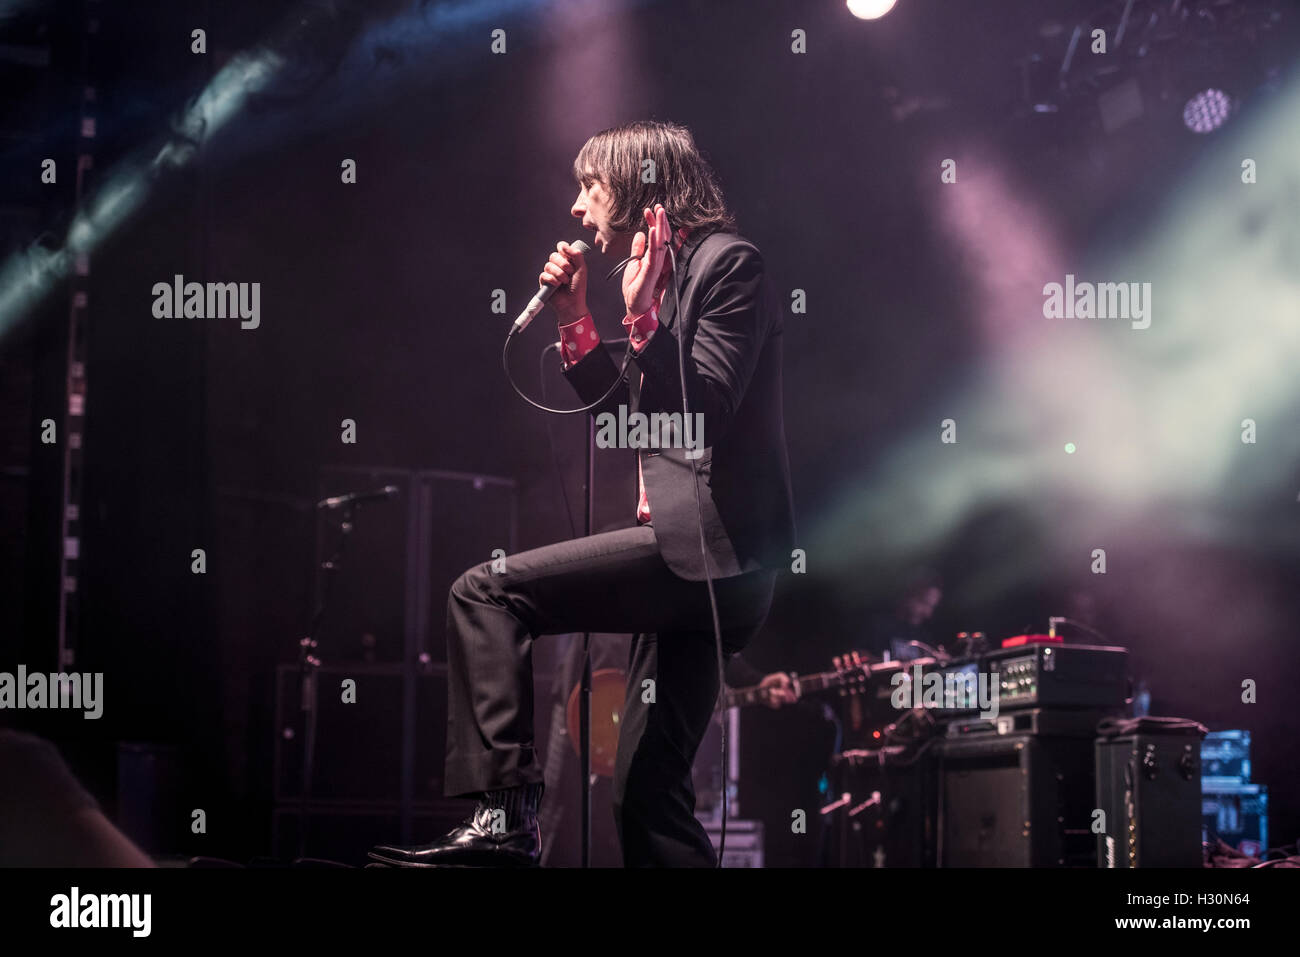 Manchester, UK. 24th September 2016. Primal Scream perform on the main stage at The British Sound Project 2016, 24/09/2016 © Gar Stock Photo